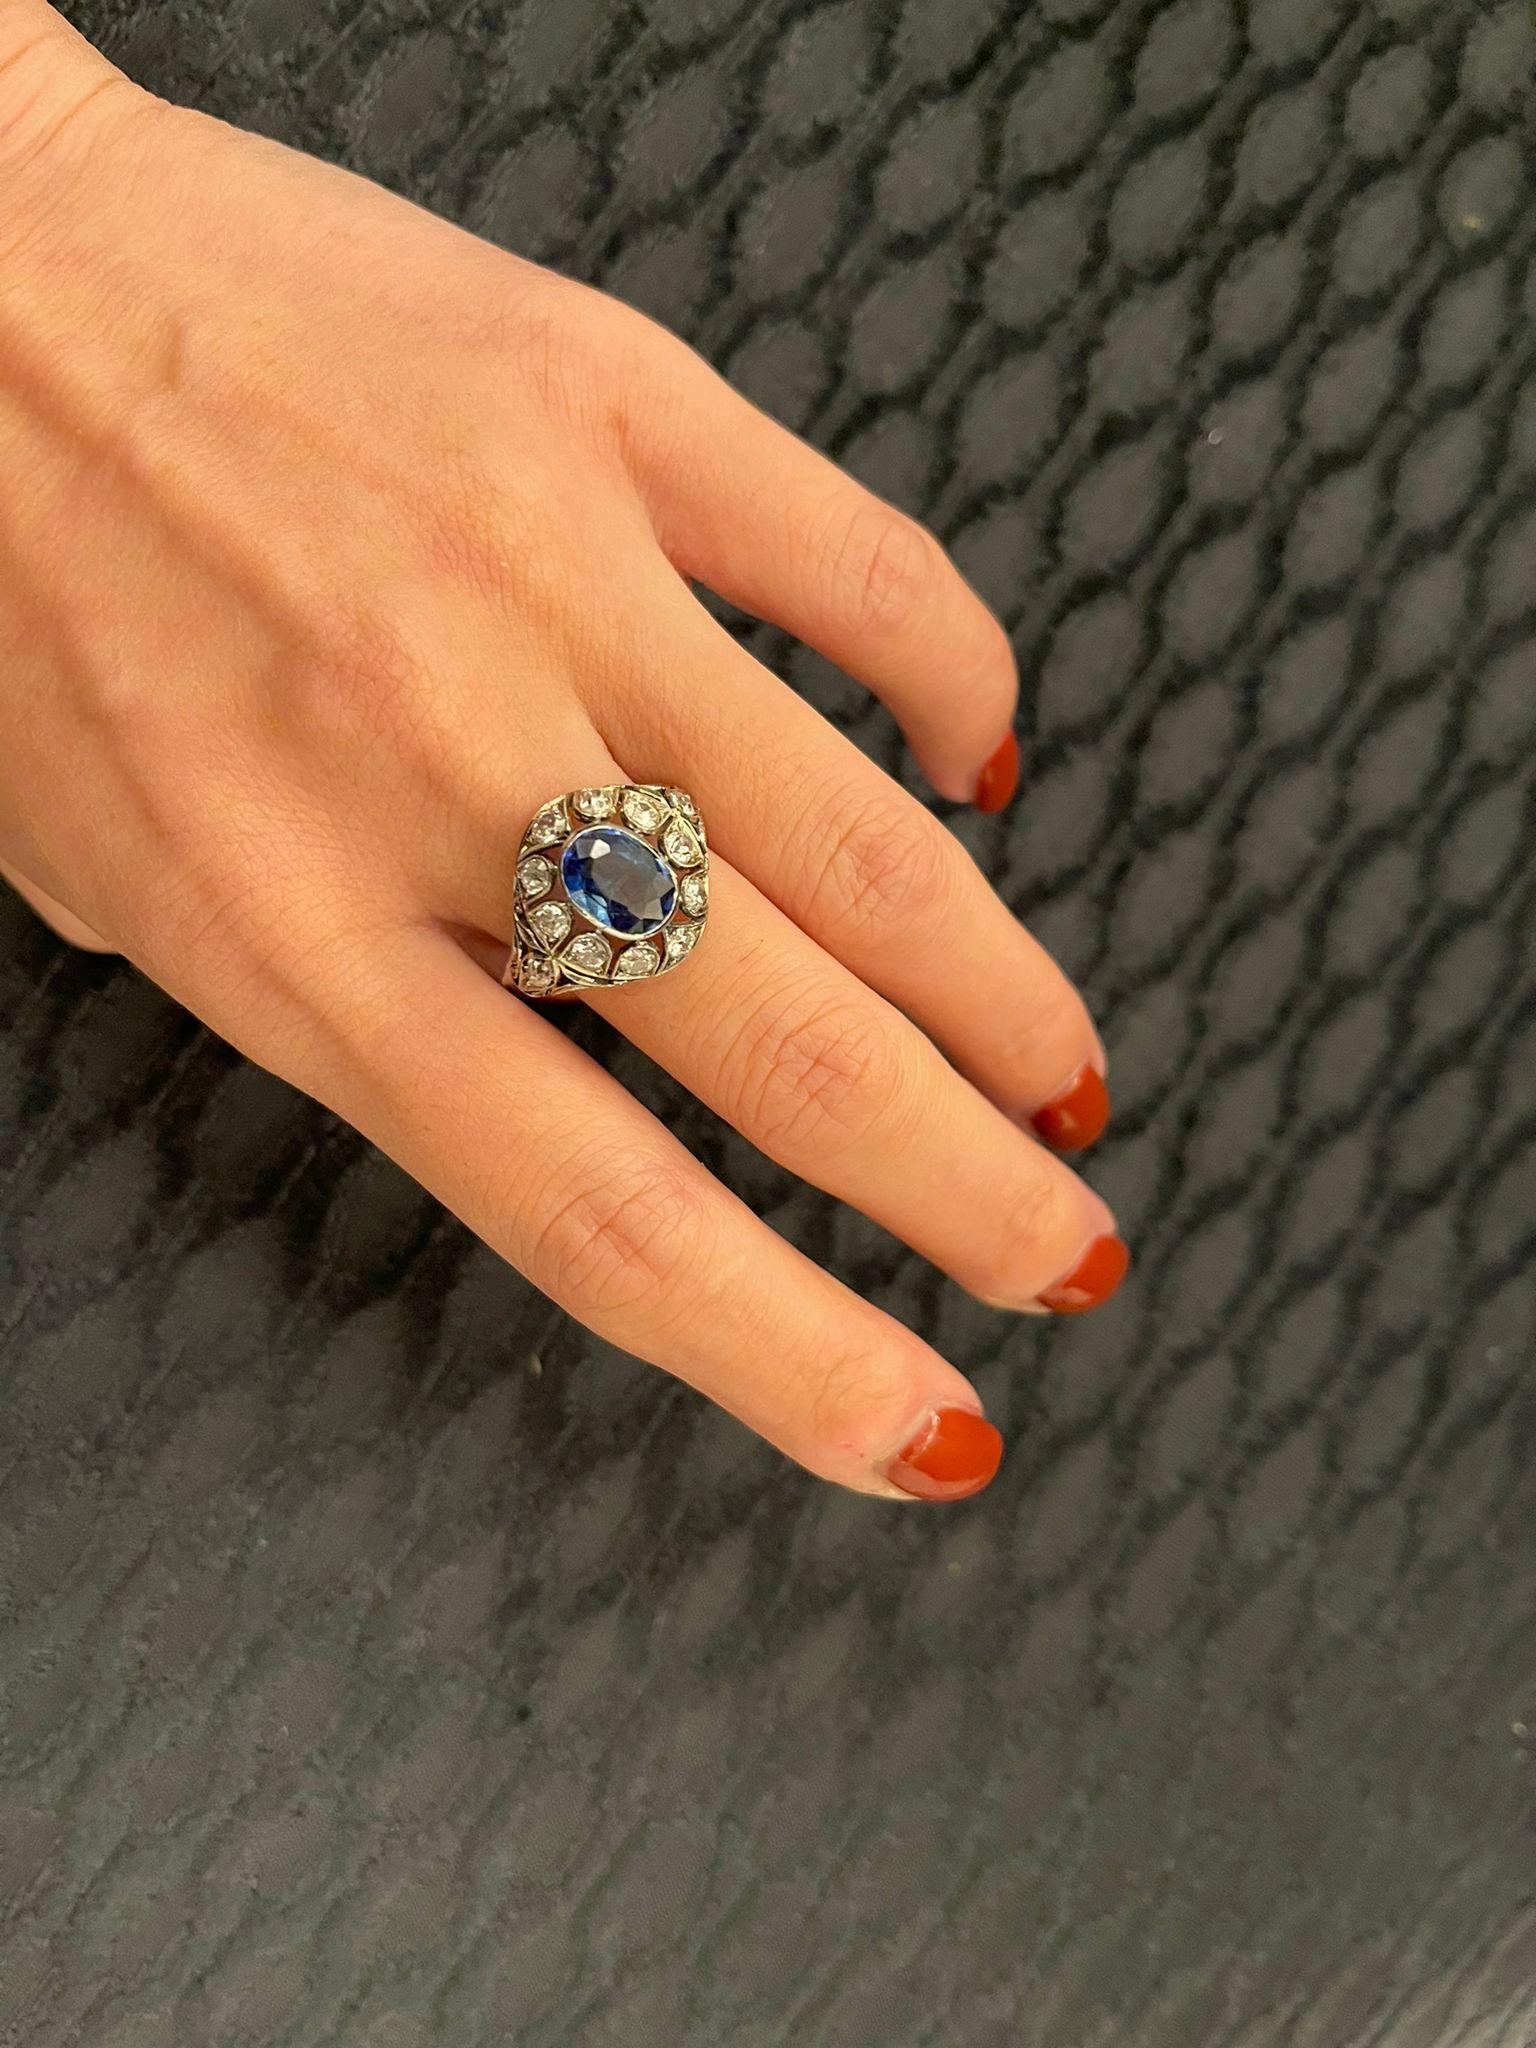 Belle Époque Certified 2.44 Carat Unheated Sapphire Diamond Gold Ring For Sale 7